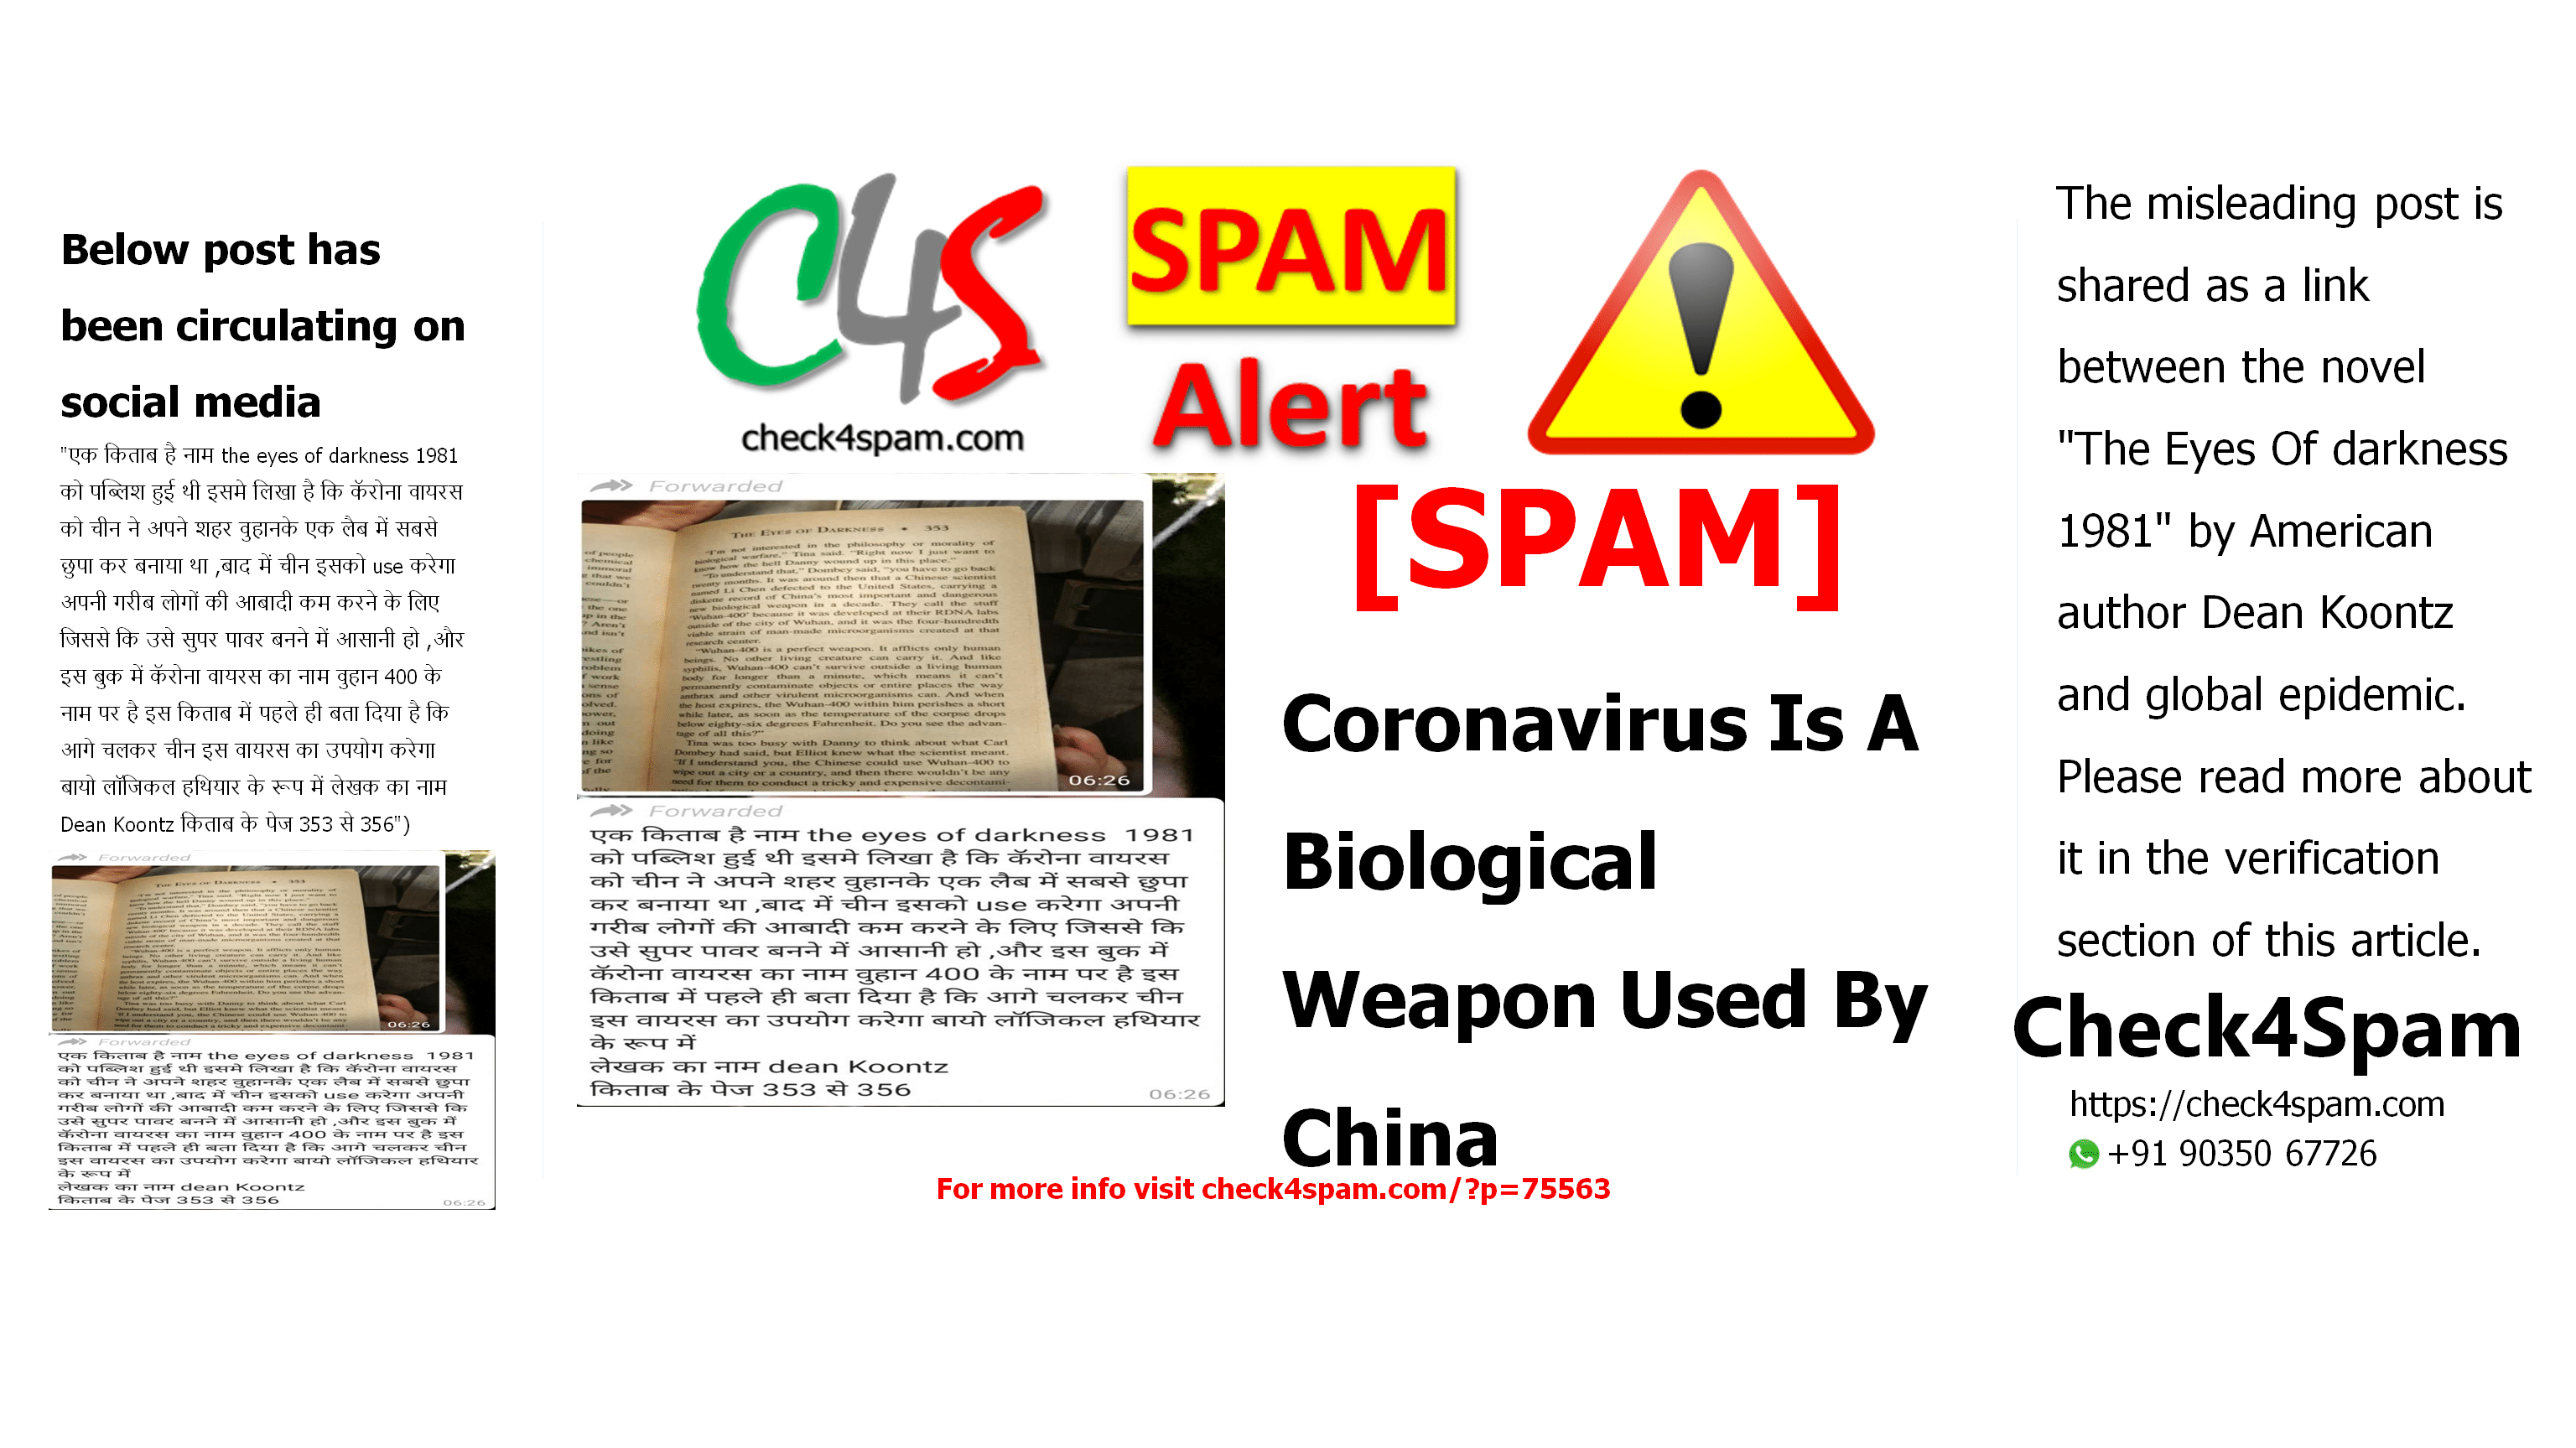 Coronavirus Is A Biological Weapon Used By China